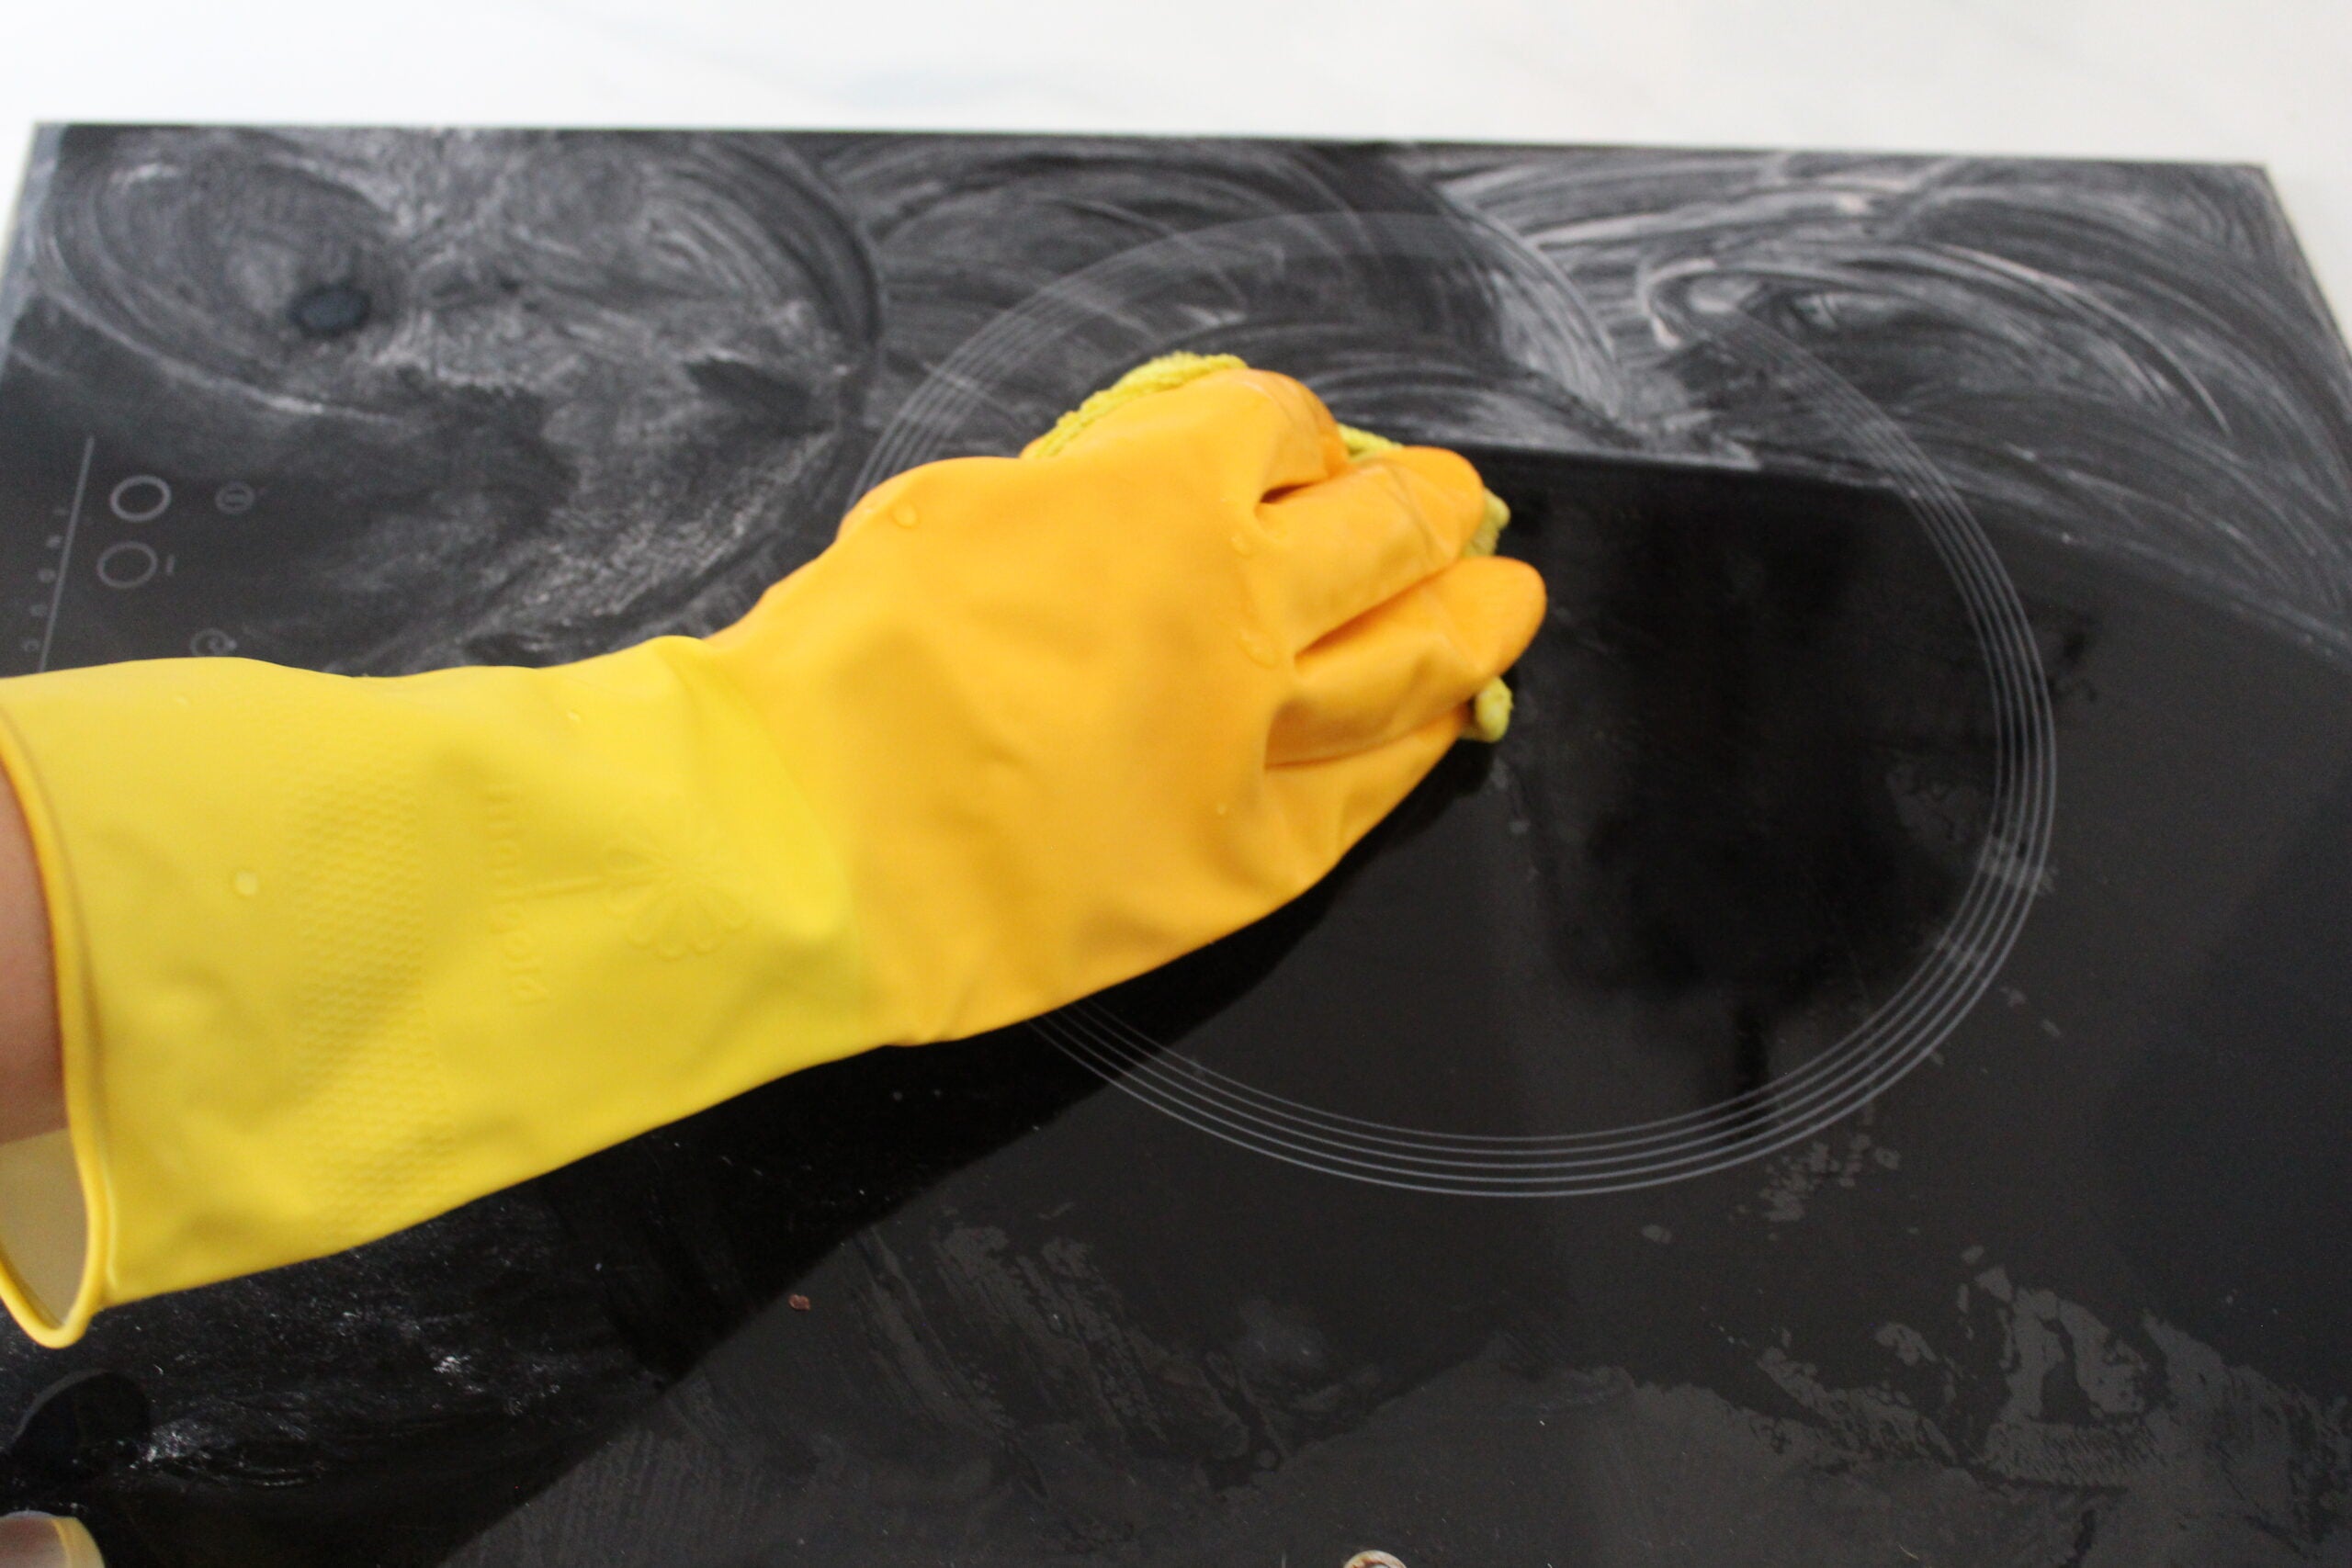 Wiping away the cleaning substance from an induction hob